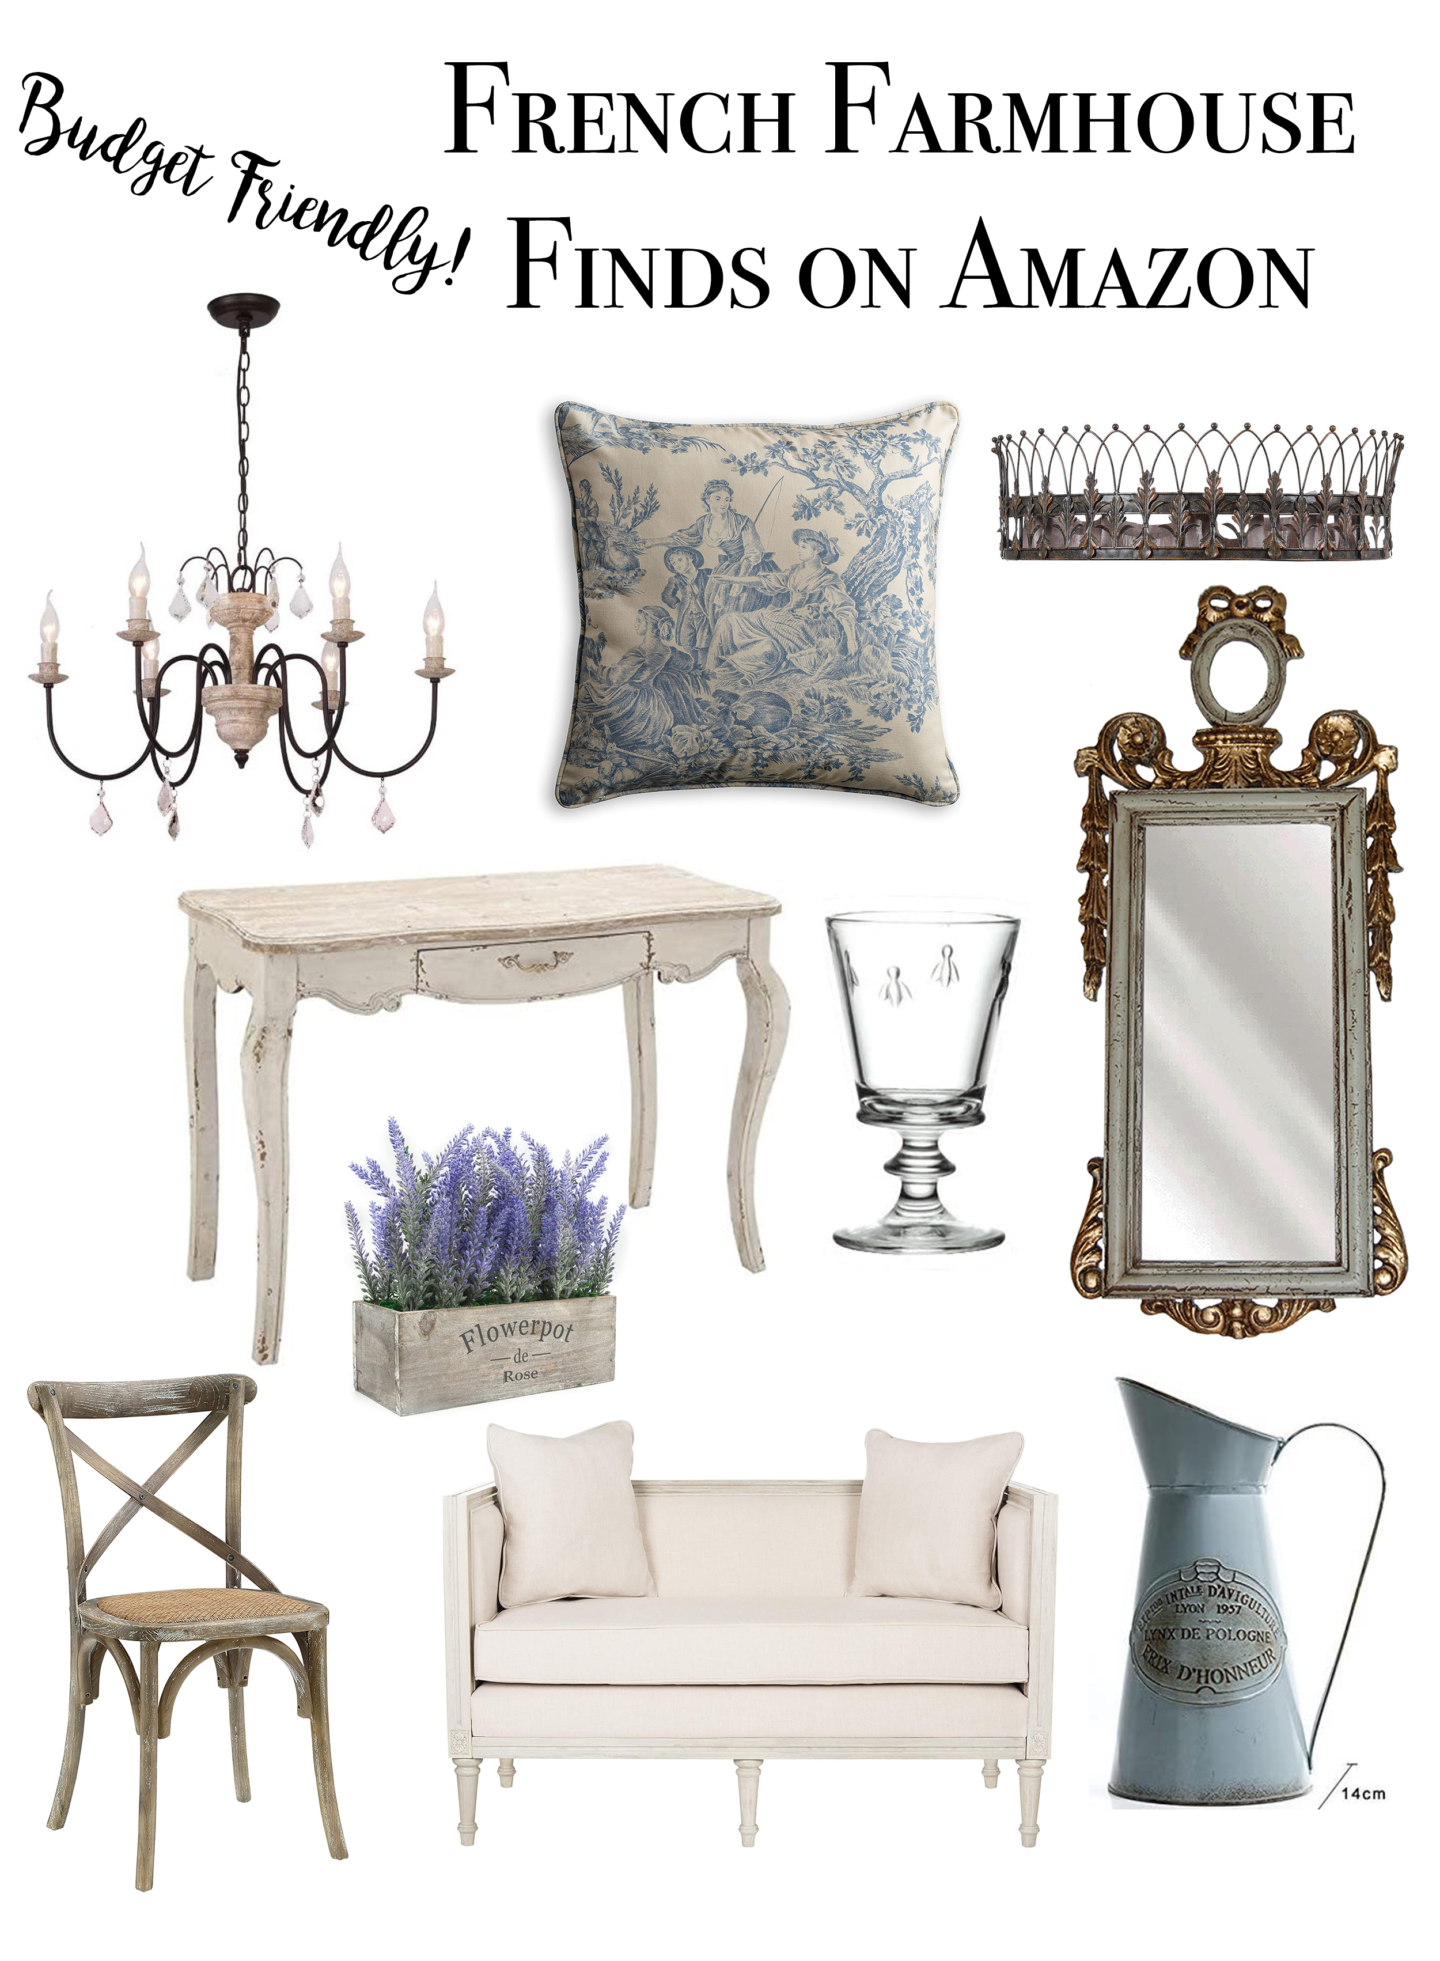 Budget Friendly French Country Farmhouse Amazon Finds